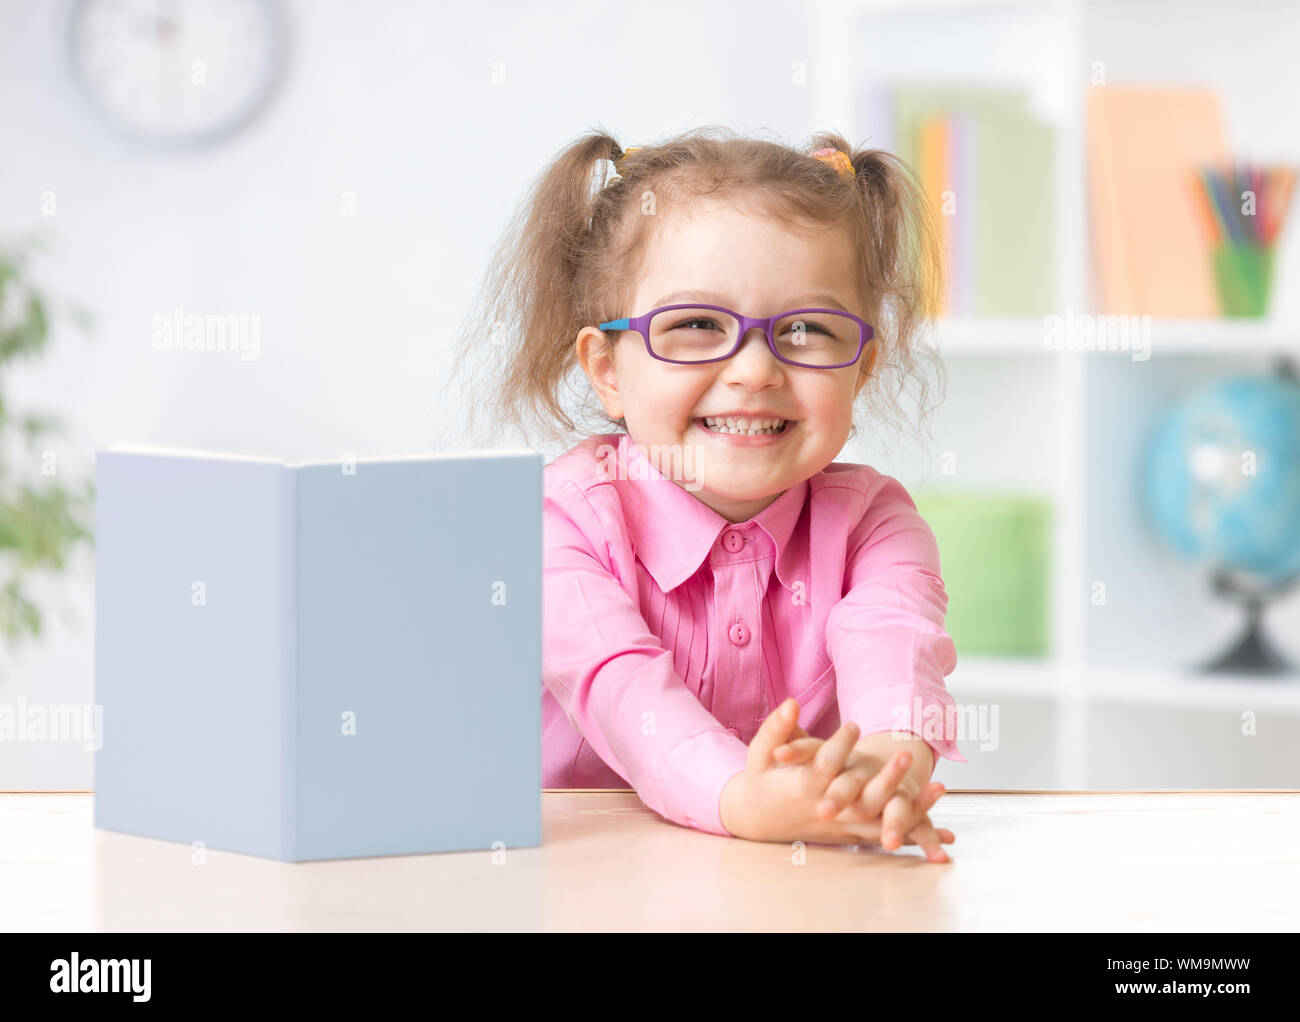 Happy kid girl in eyeglasses reading with standing book on her table Stock Photo